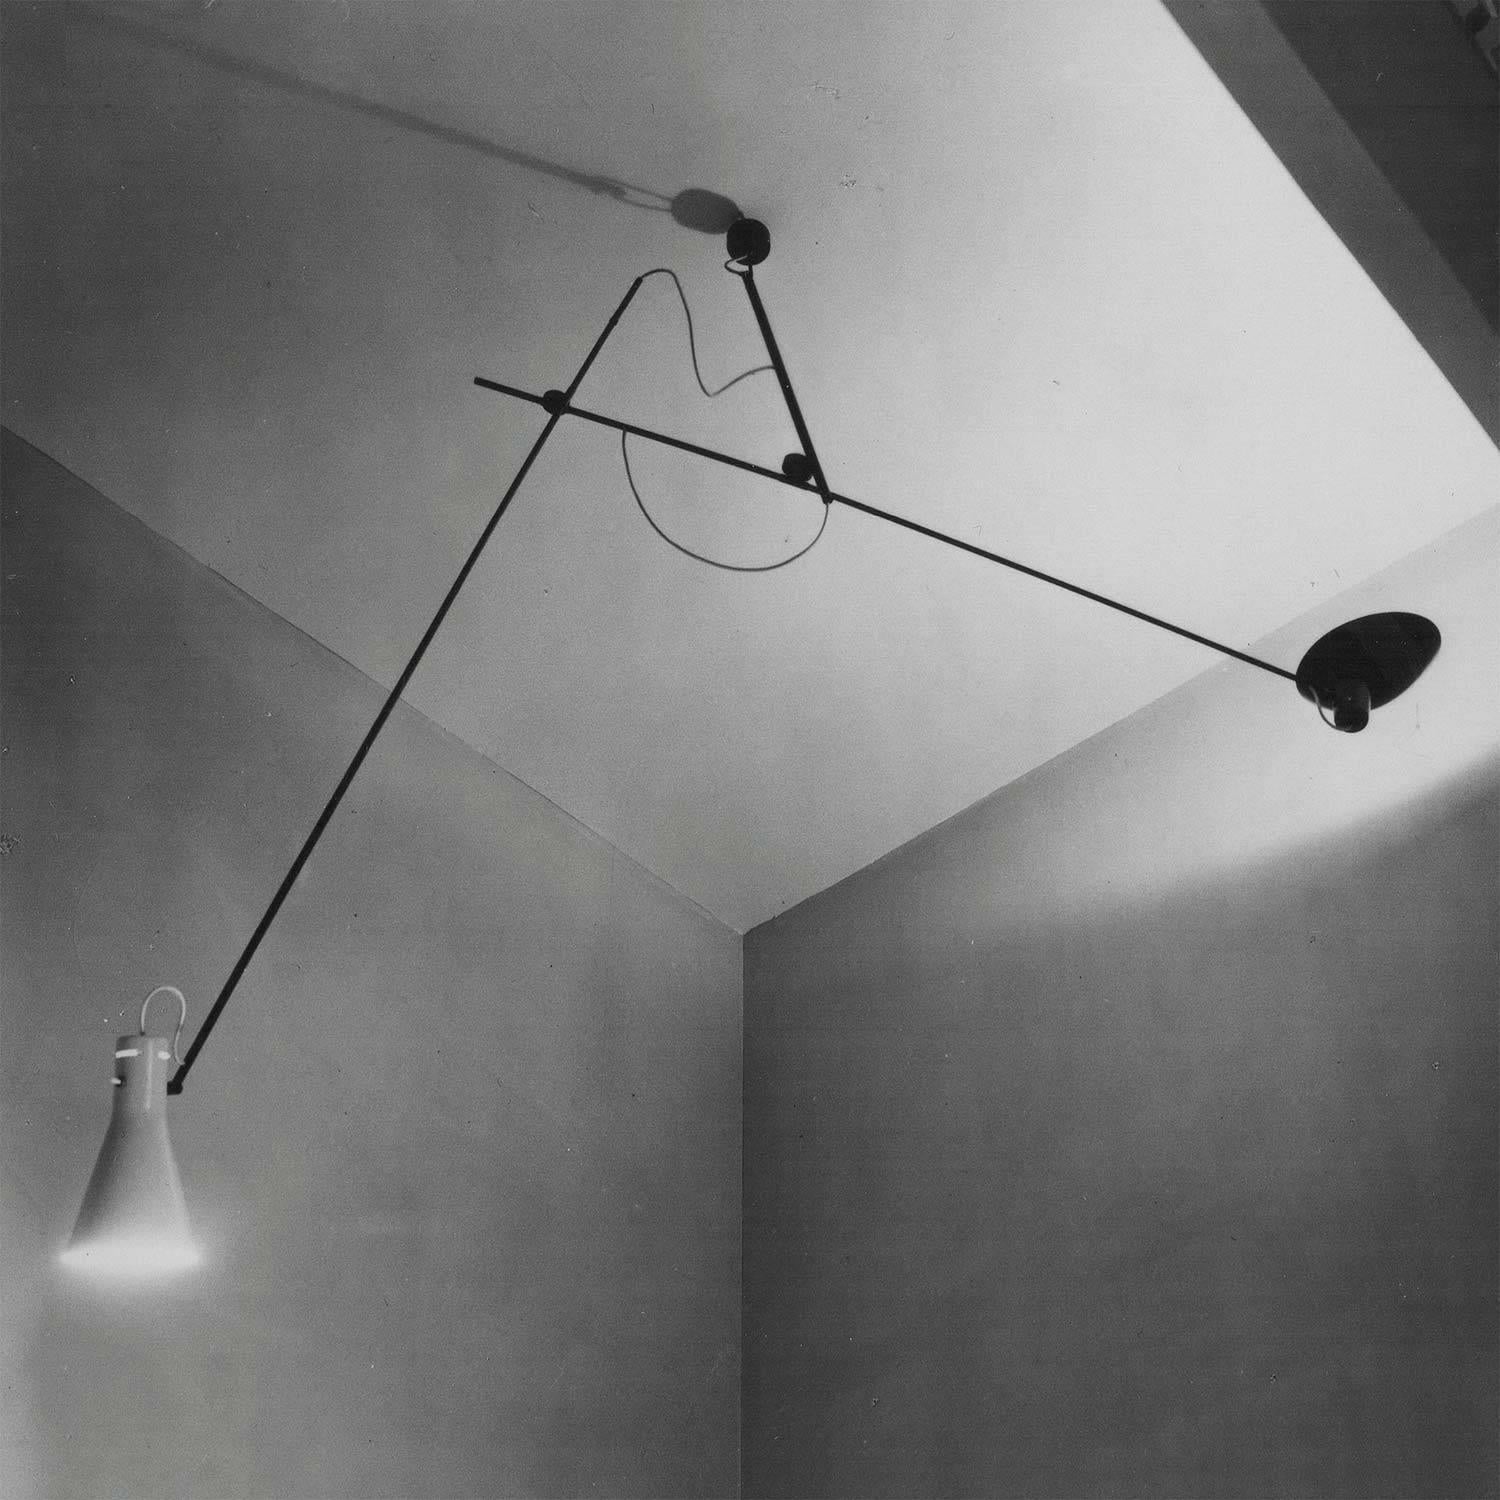 Vittoriano Viganò 'VV Cinquanta' suspension lamp in black and white for Astep. 

Viganò was the art director of Arteluce, the company founded by his creative partner Gino Sarfatti, and the visor was one of his most celebrated design series. Designed